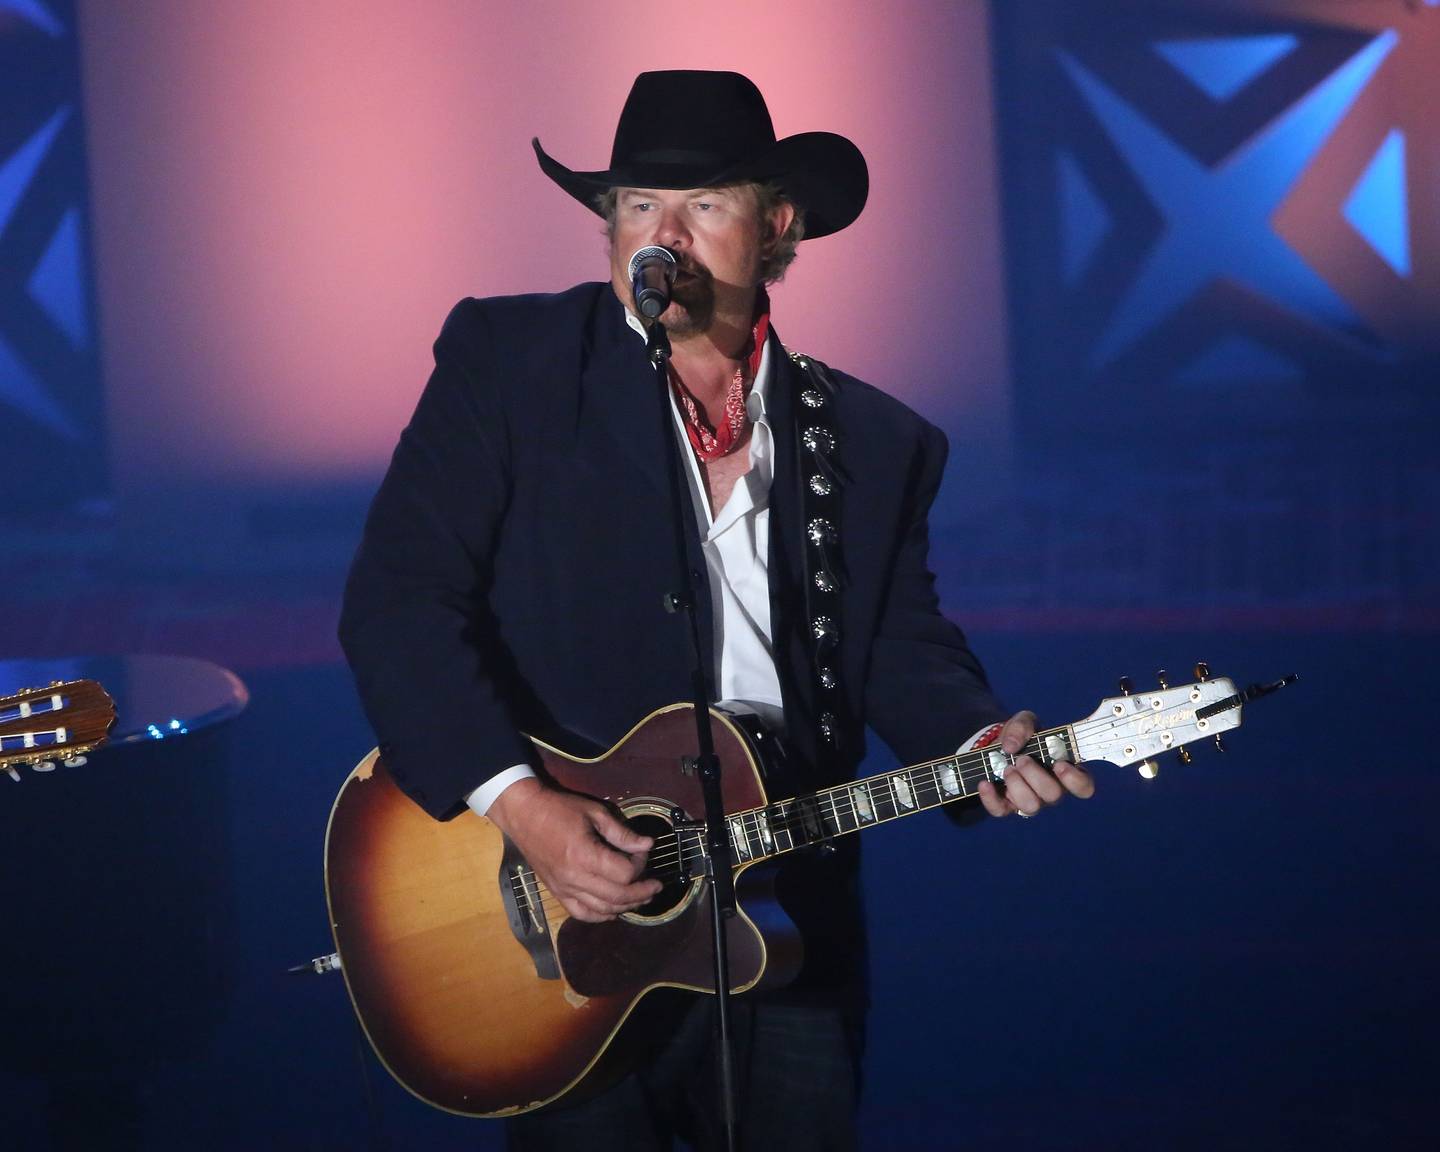 Toby Keith Among Nashville Songwriters Hall of Fame Inductees | News | CMT